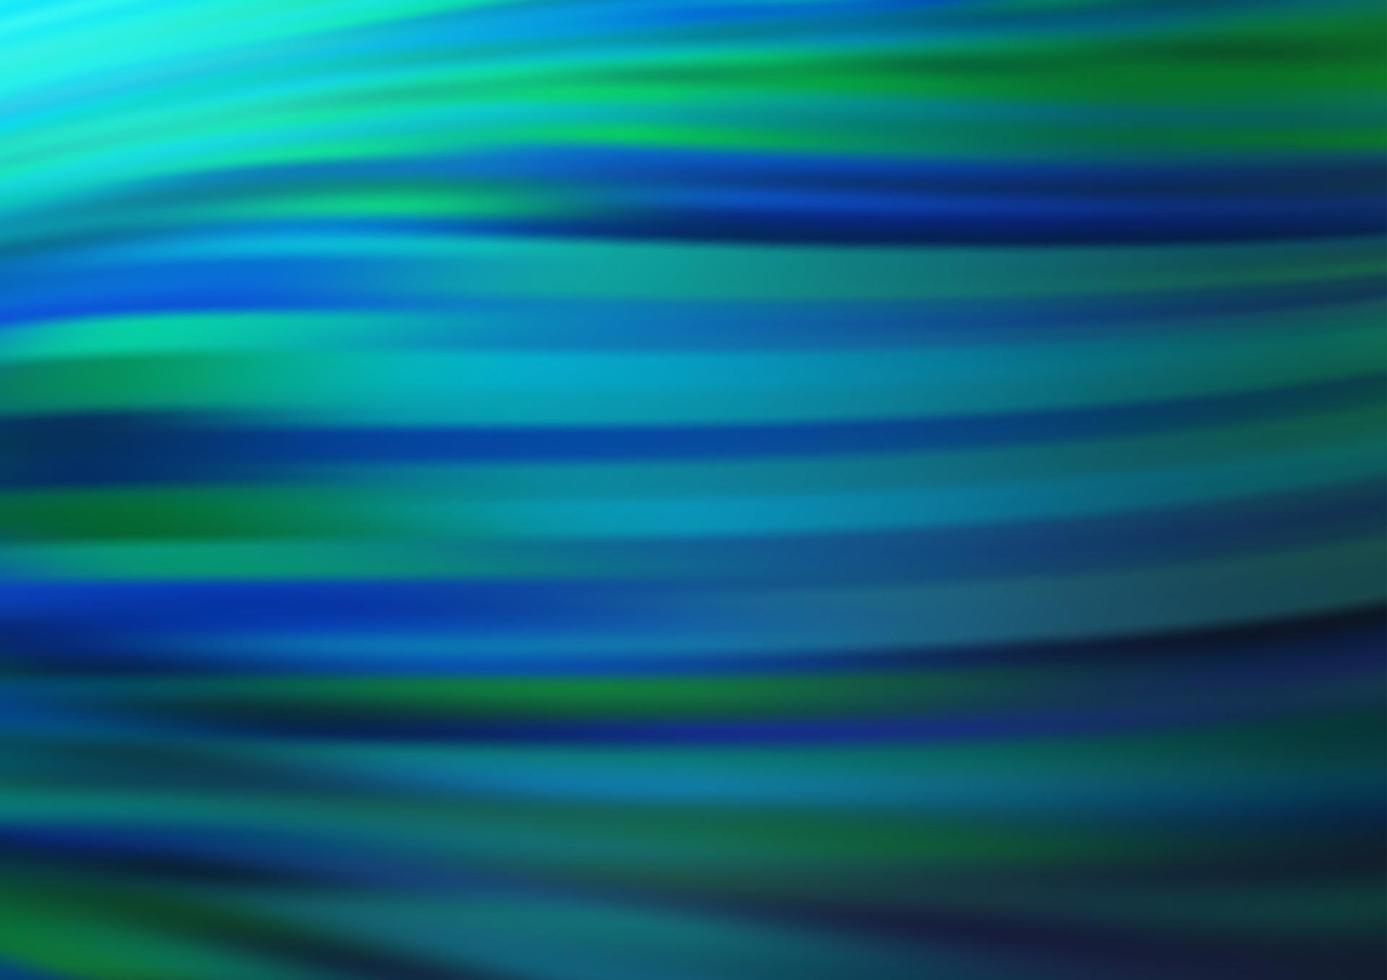 Dark Blue, Green vector pattern with curved circles.